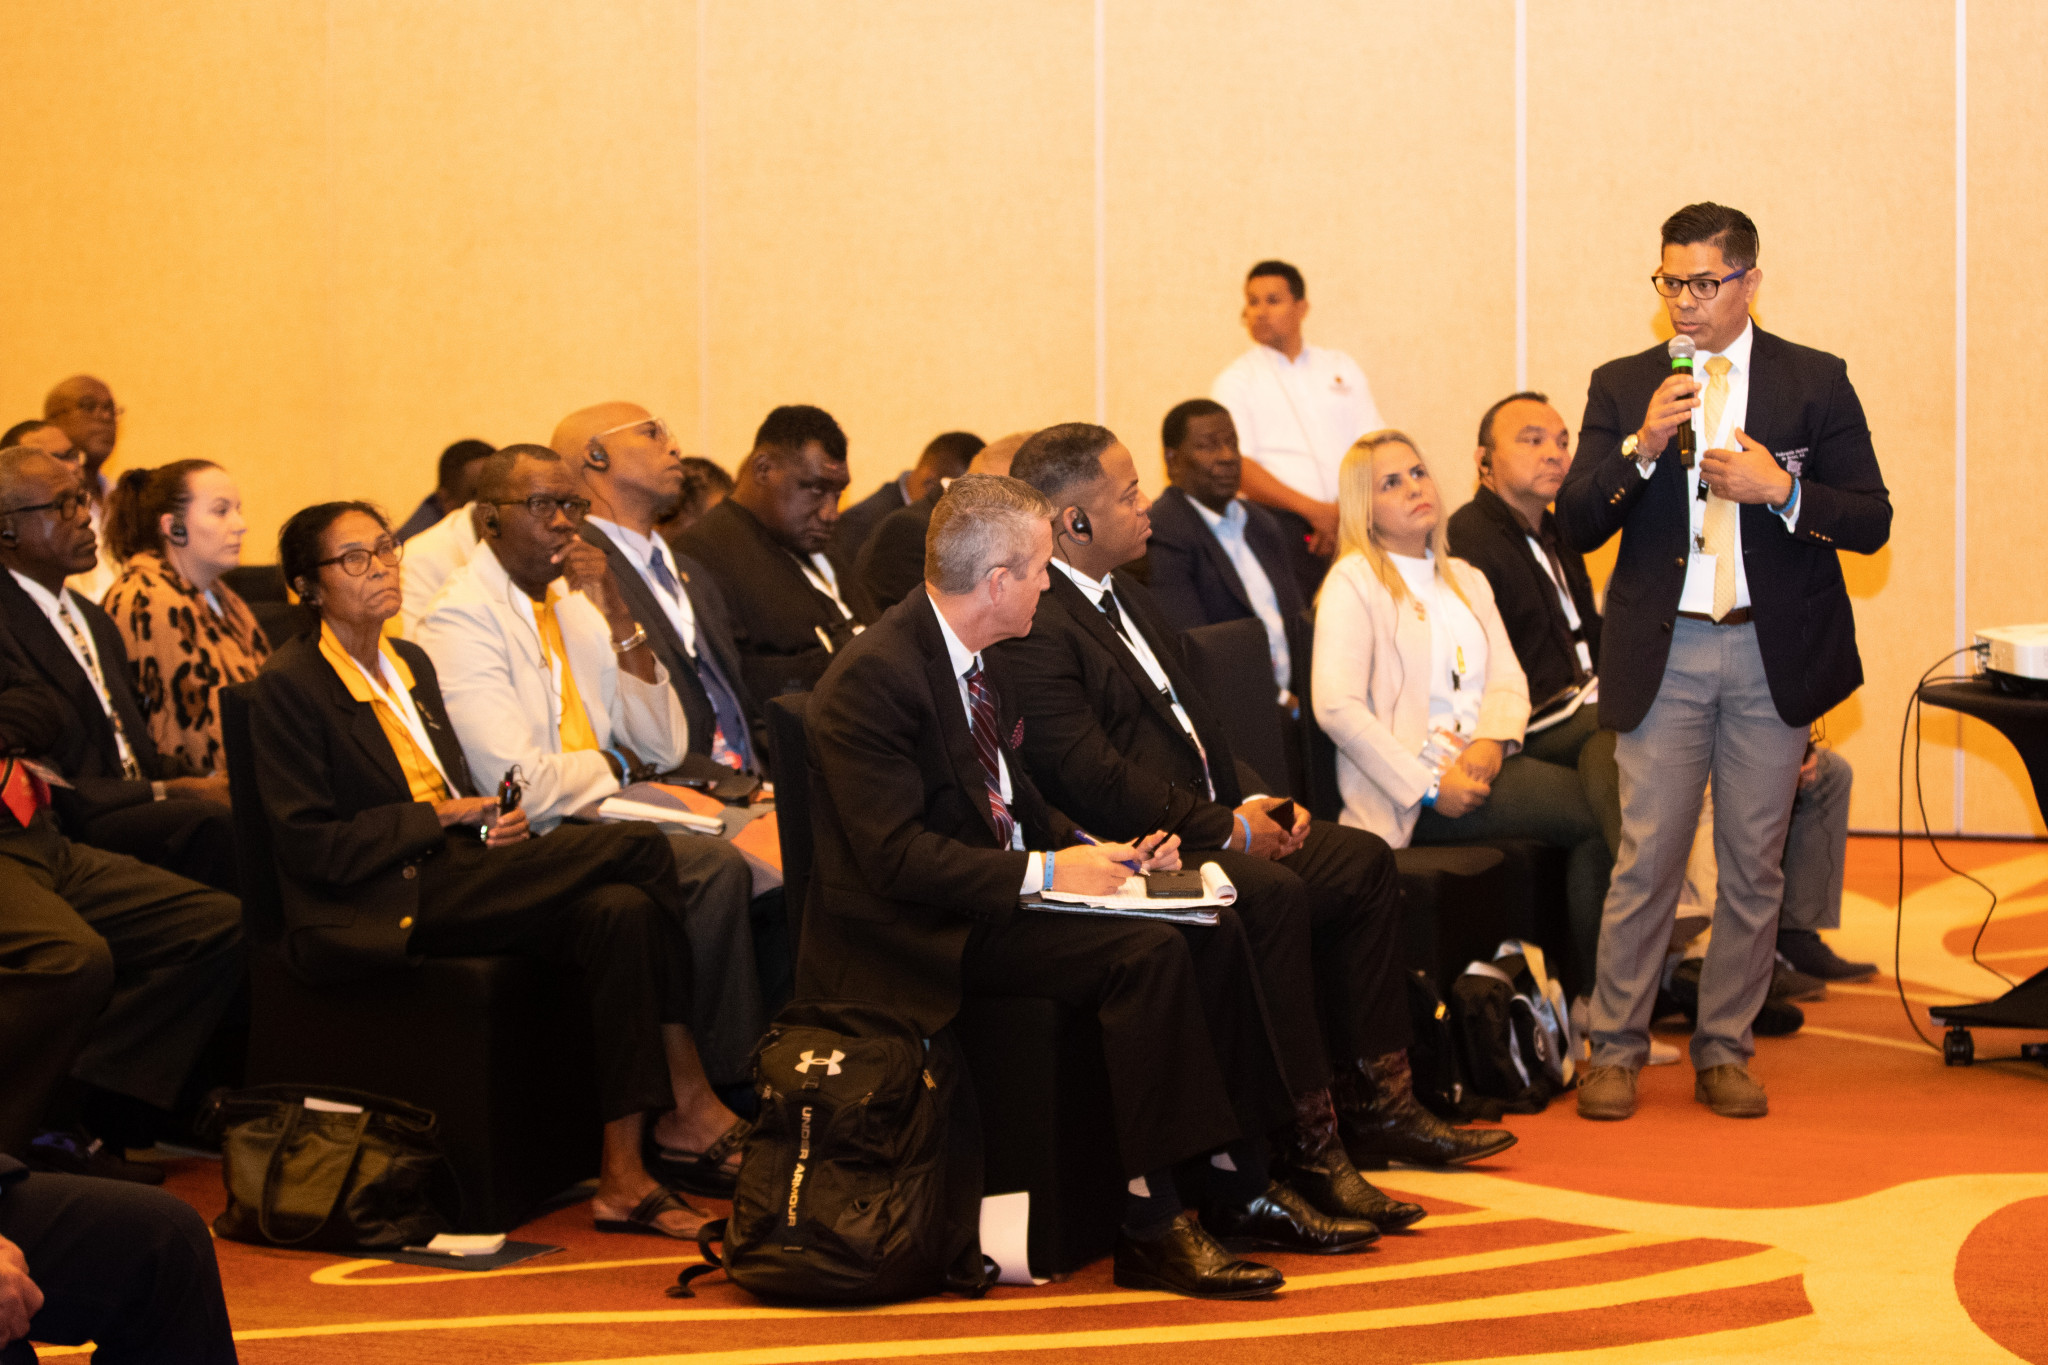 Delegates were encouraged to participate in open discussion sessions ©AIBA